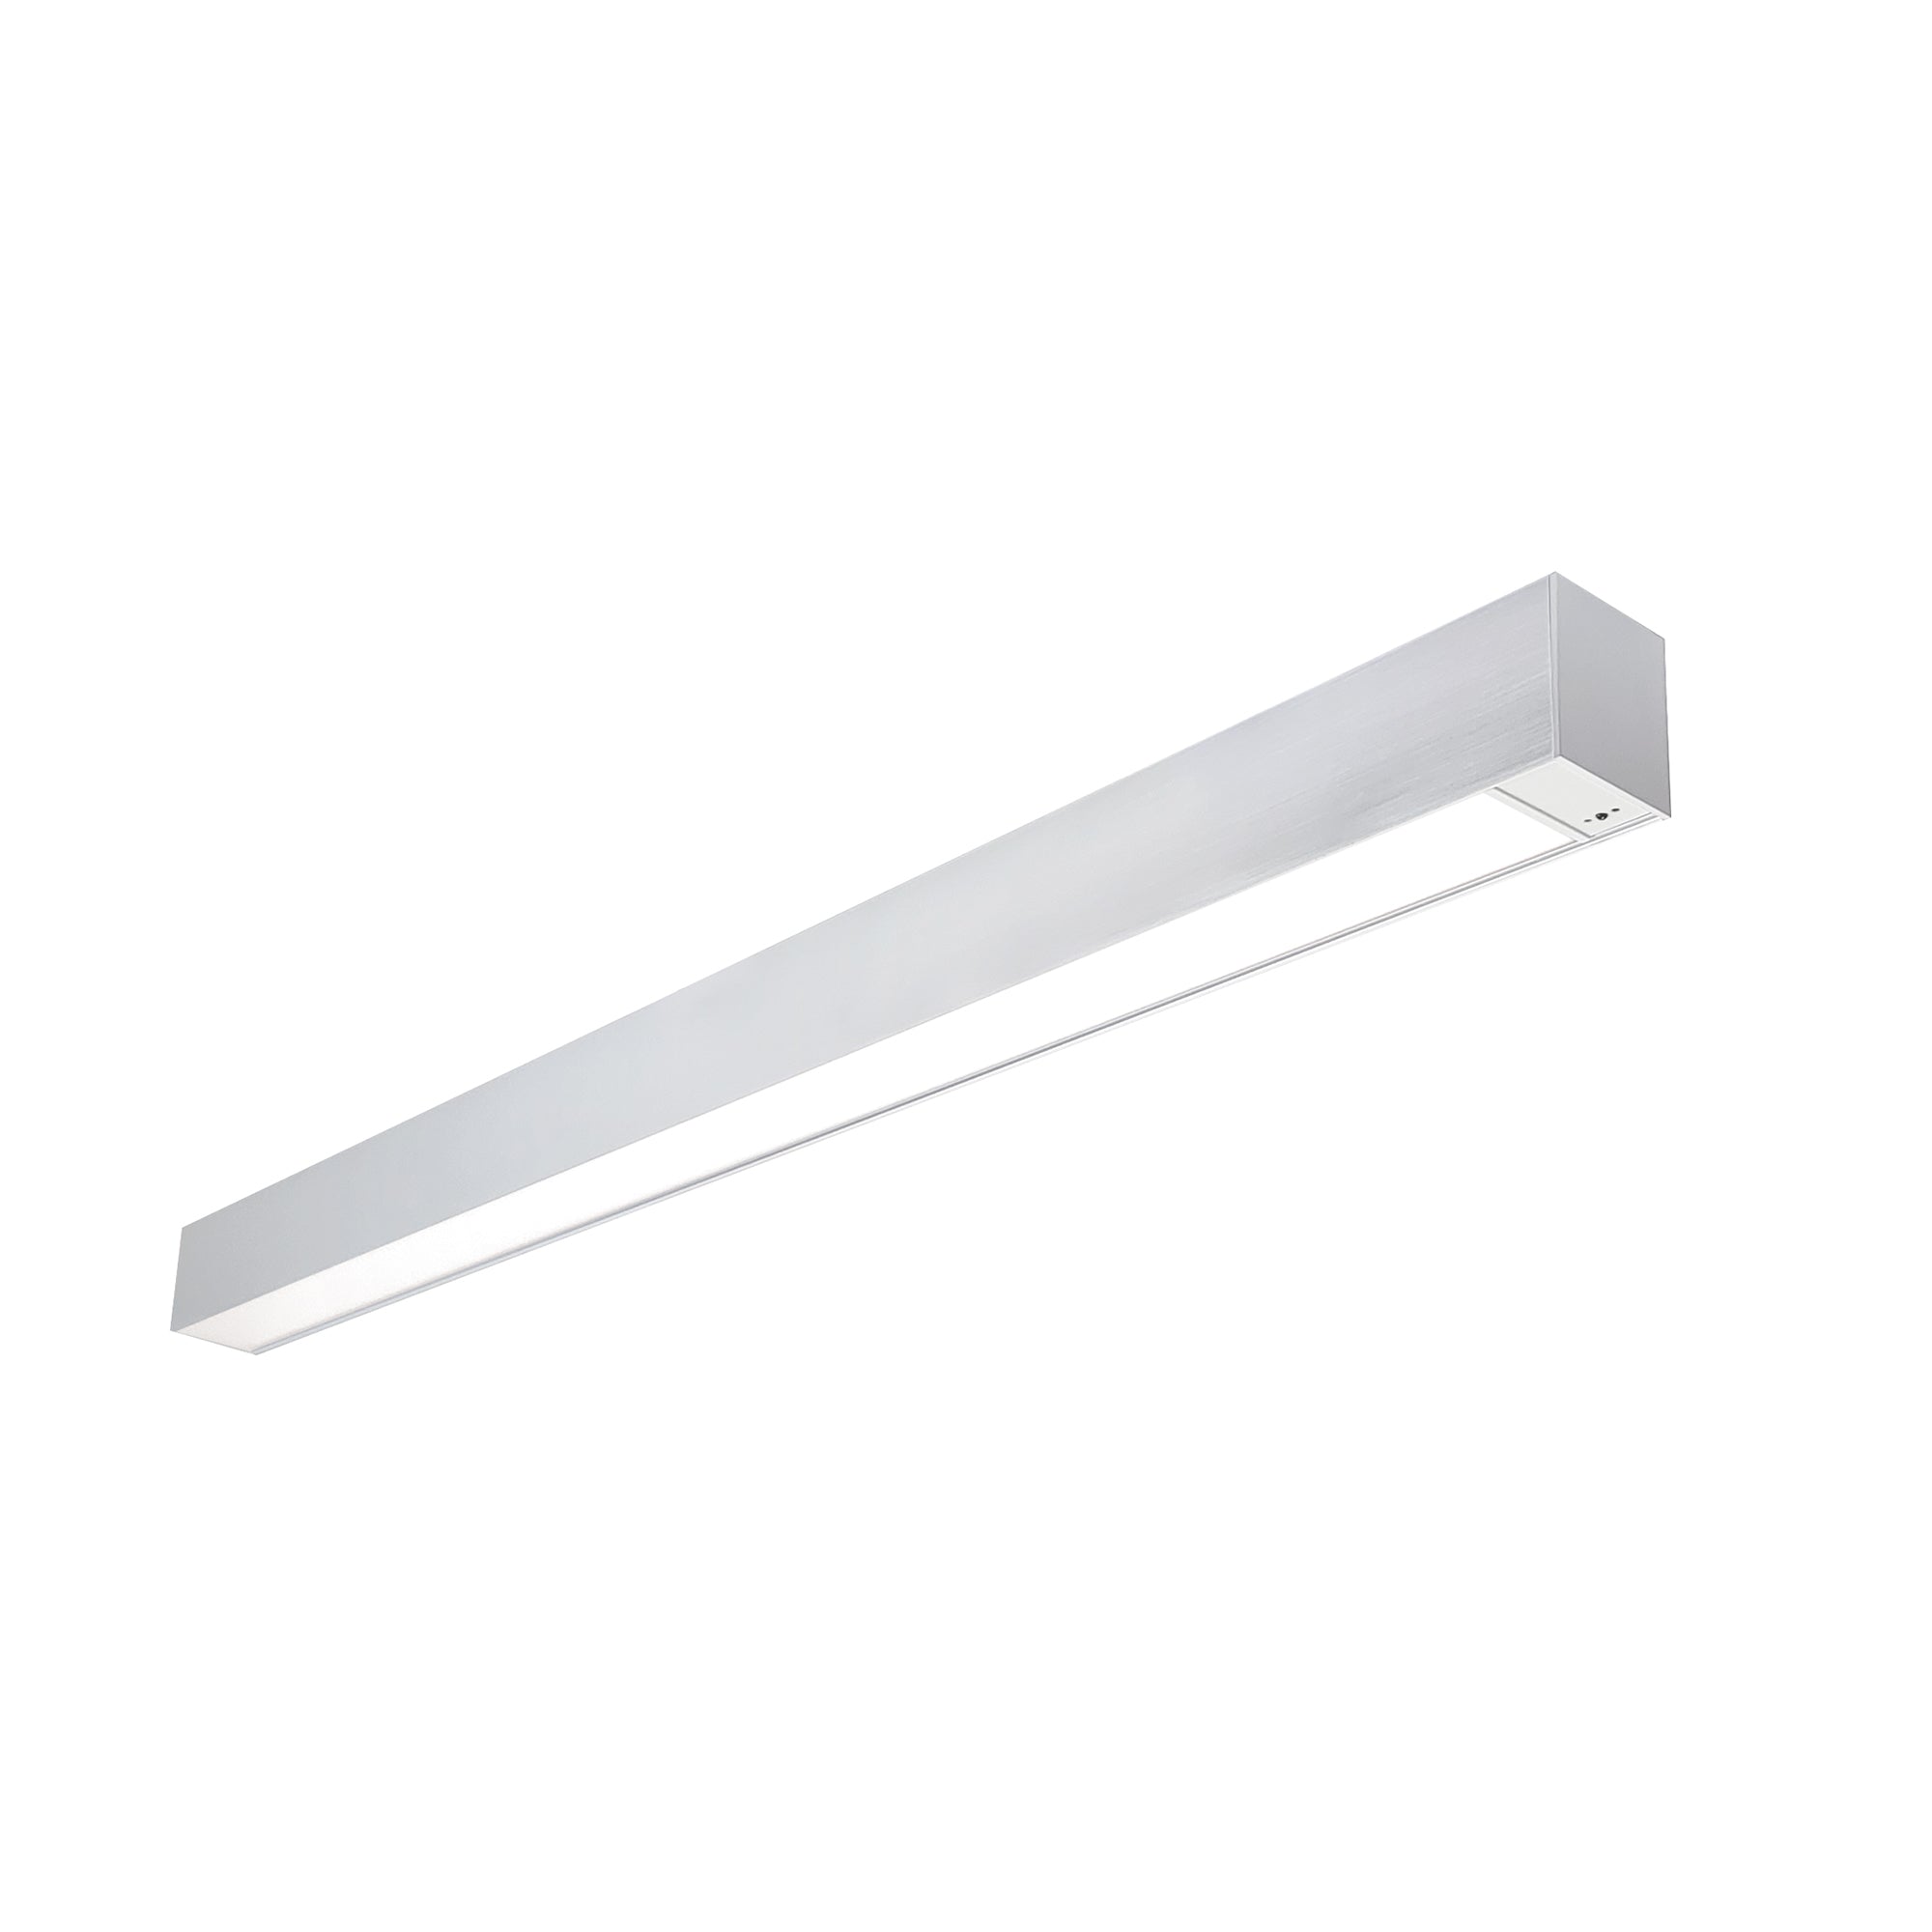 Nora Lighting NLUD-4334A/OS - Linear - 4' L-Line LED Indirect/Direct Linear, 6152lm / Selectable CCT, Aluminum Finish, with Motion Sensor